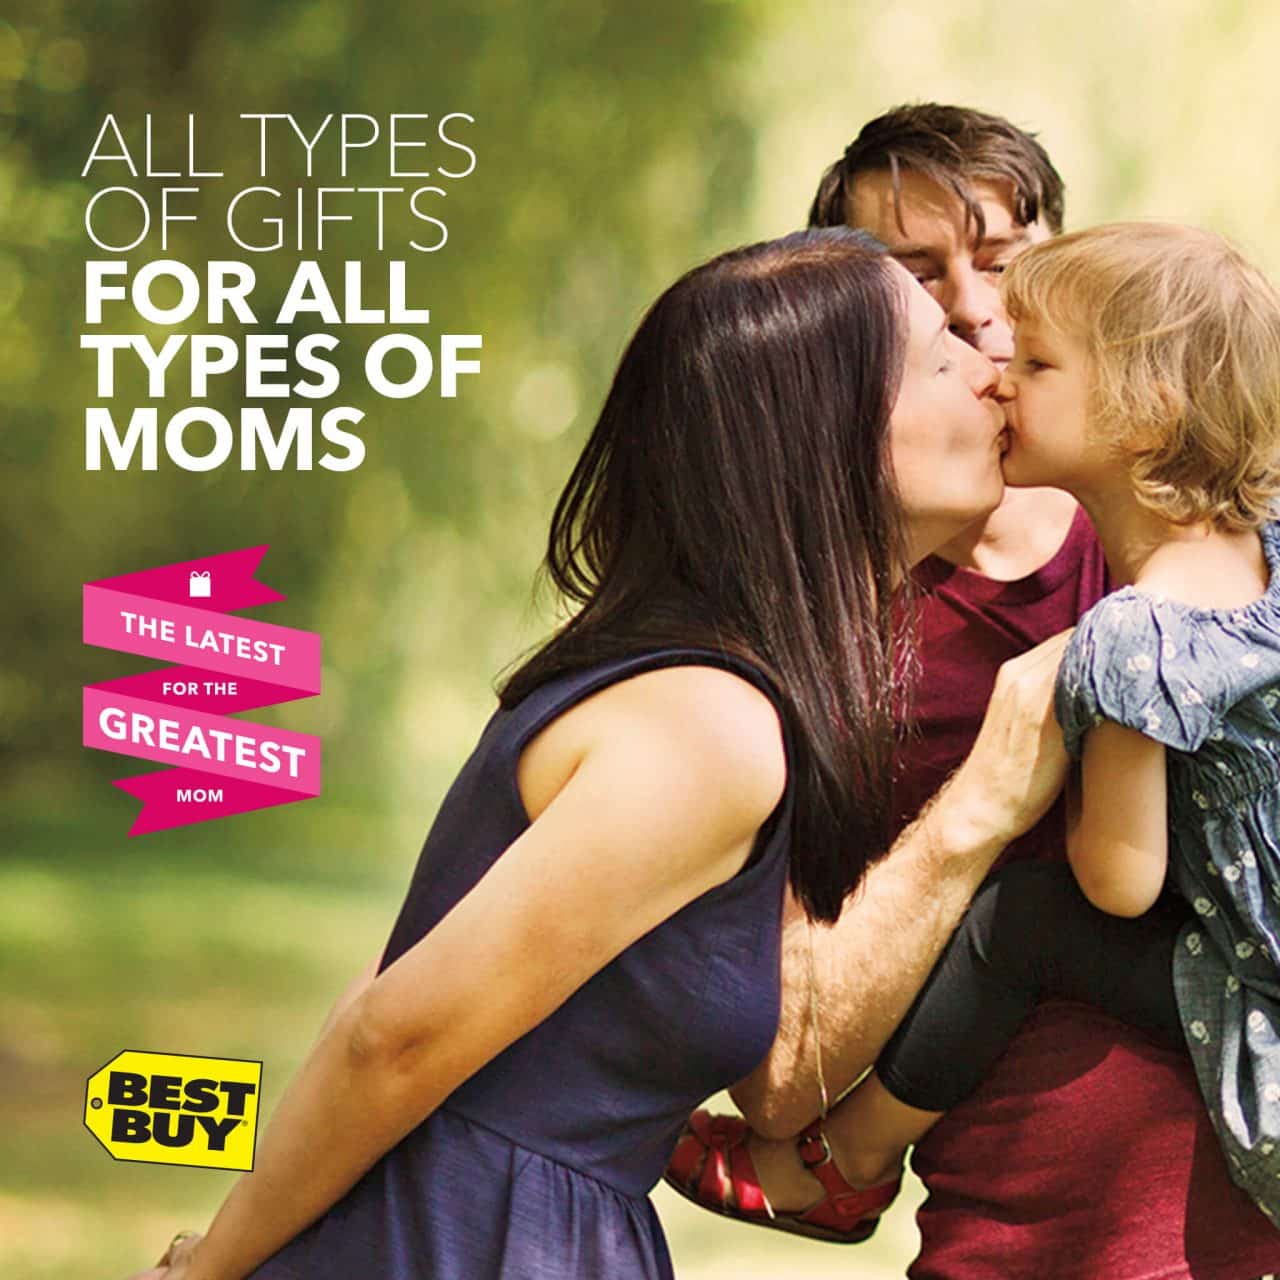 All Types of Gifts For All Types of Moms